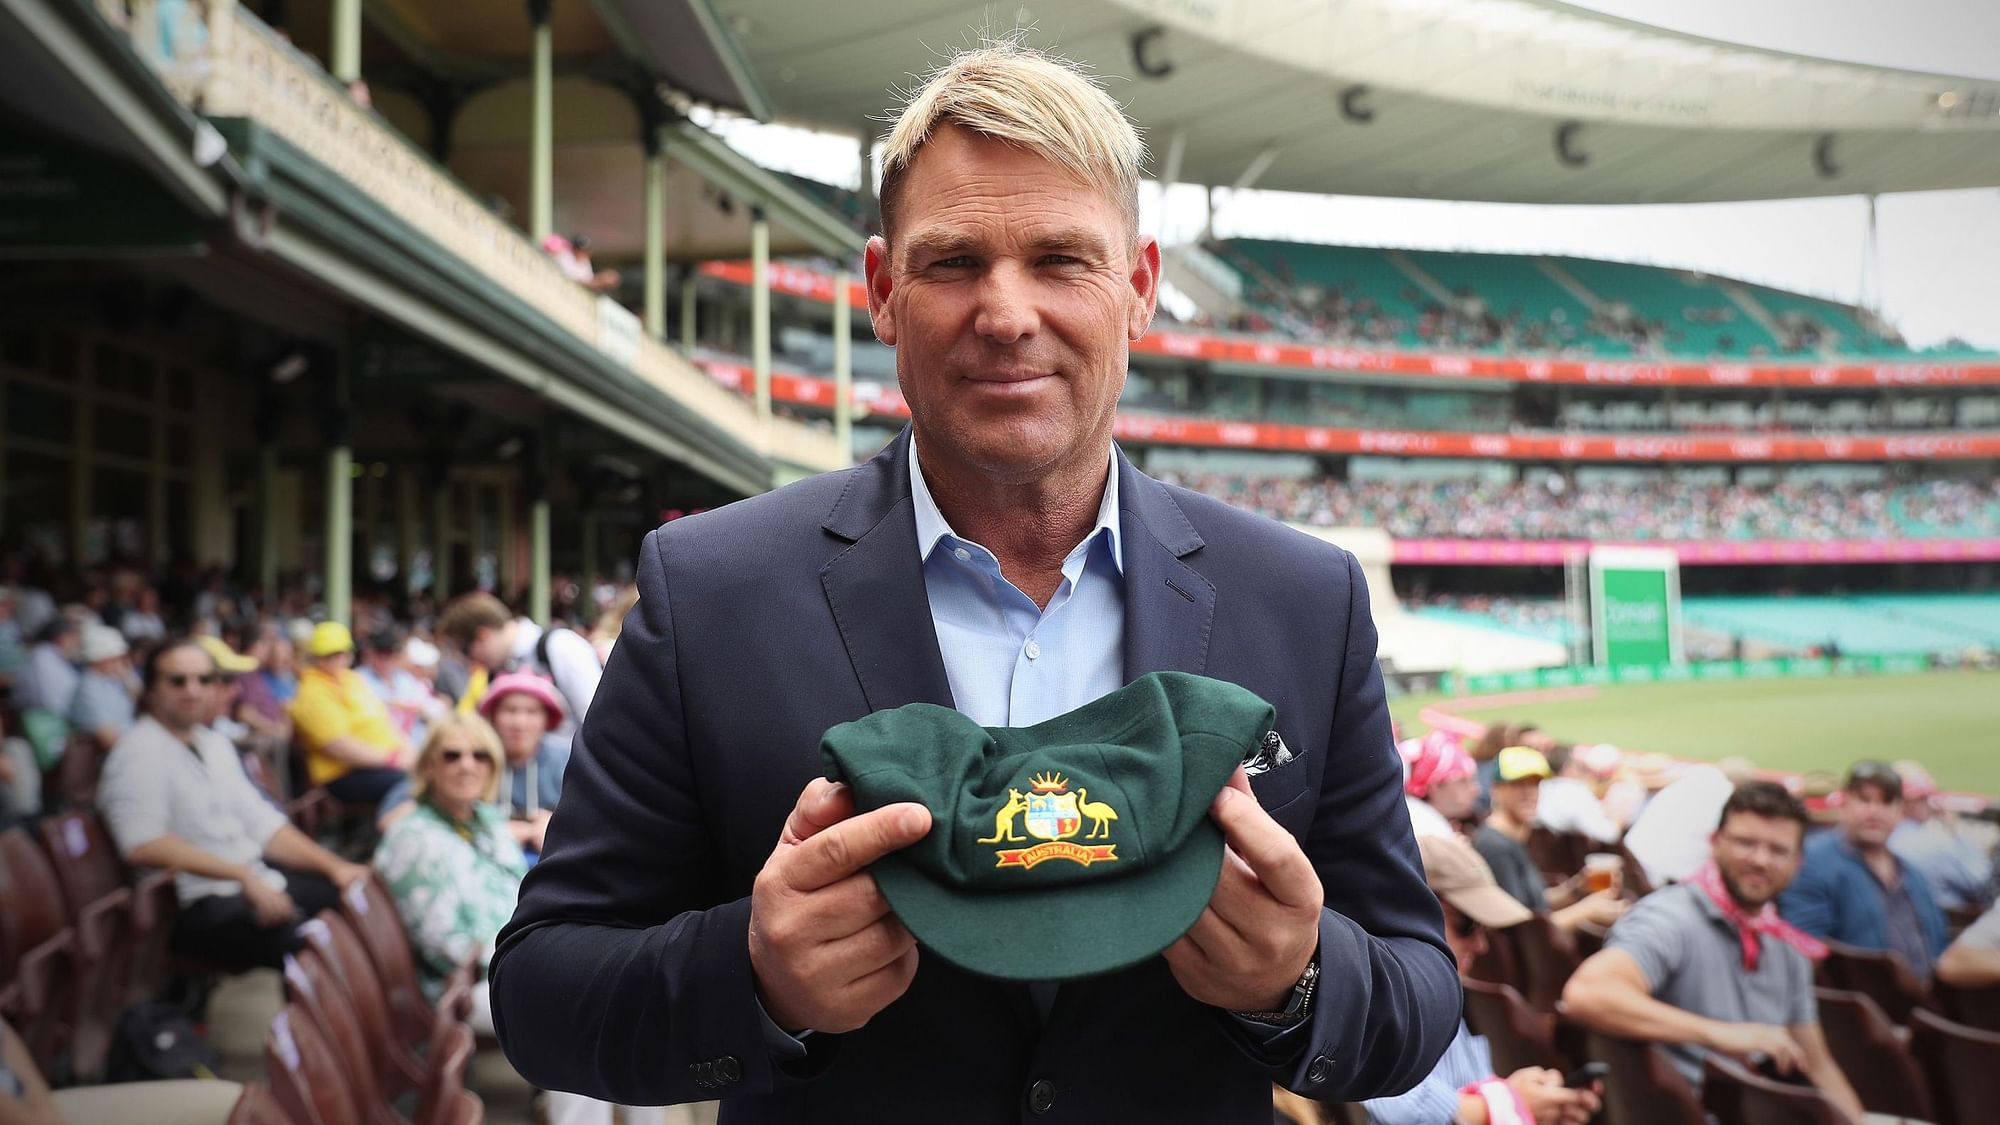 Shane Warne has named Sourav Ganguly as the captain of his India XI.